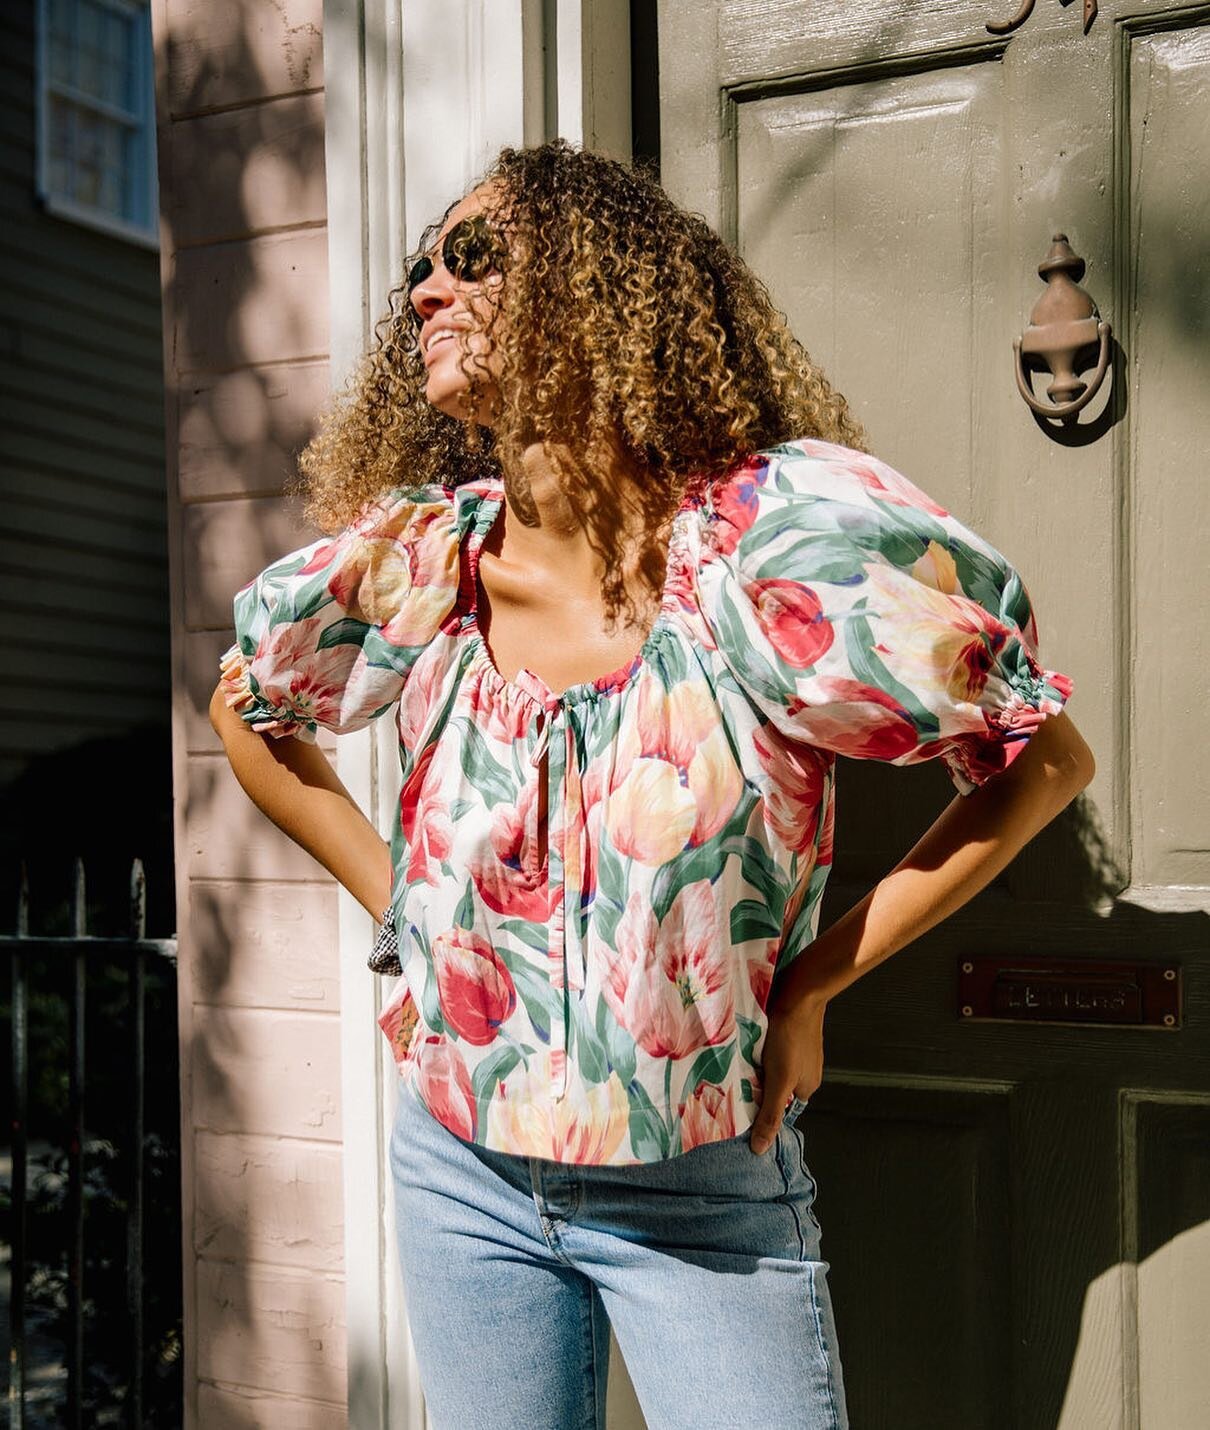 Soaking in that late summer sunlight ☀️☀️☀️ our Jasmine top is such a good transitional piece. Wear it with jorts or bike shorts in the summer, or hi waisted jeans in the fall! 

I&rsquo;d also love to see this styled with a leather mini and knee hig